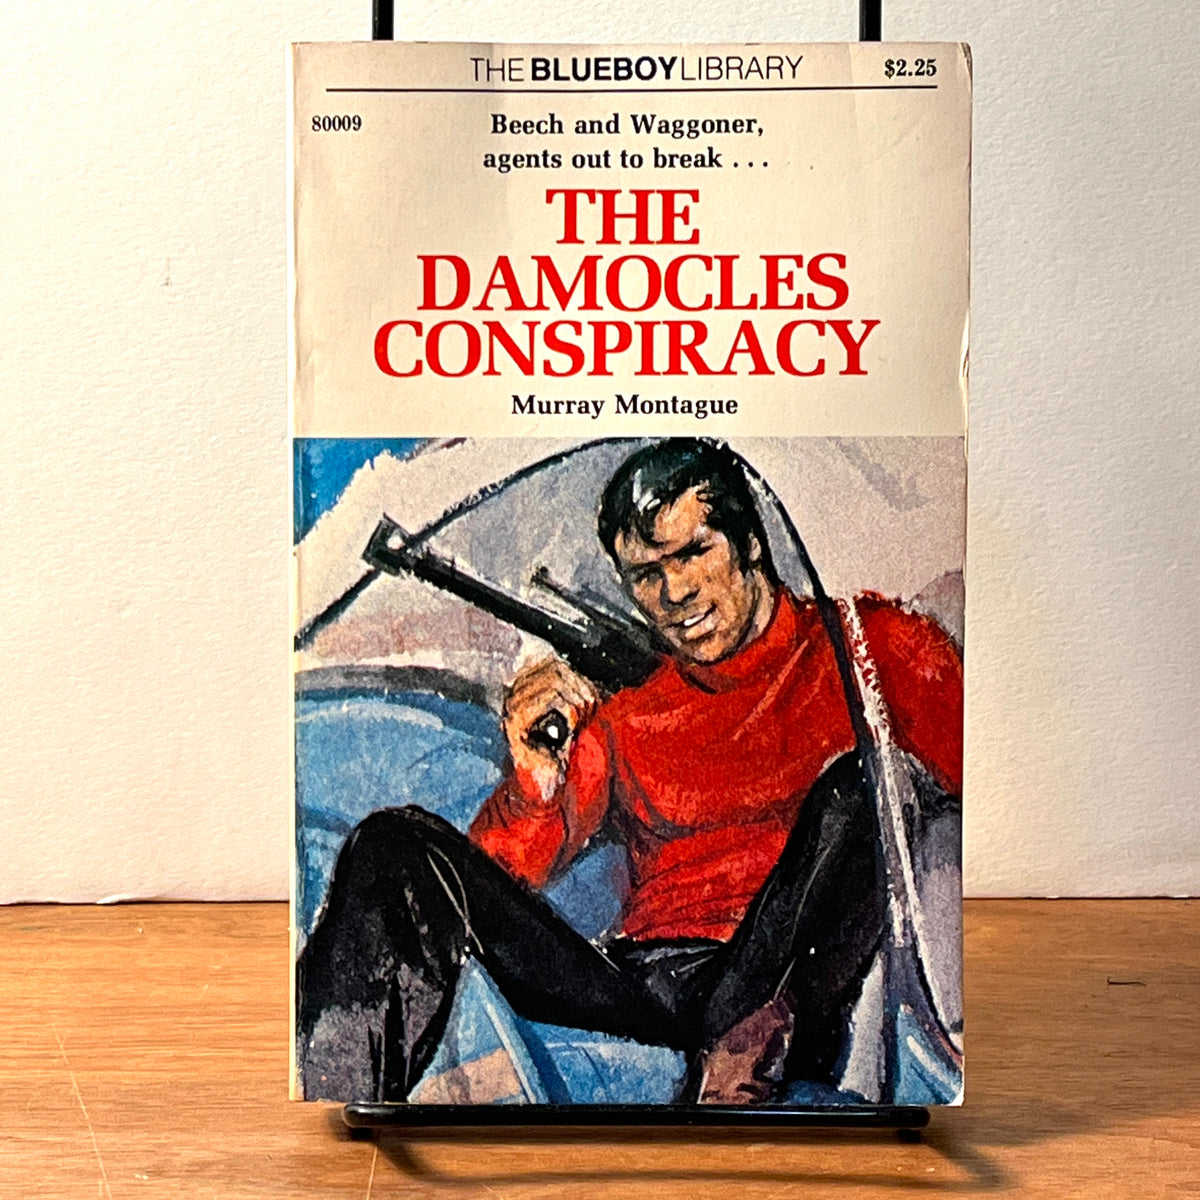 The Damocles Conspiracy. Murray Montague. Good SC 1976 1st Print. The Blueboy Library. LGBTQ Eros 18+